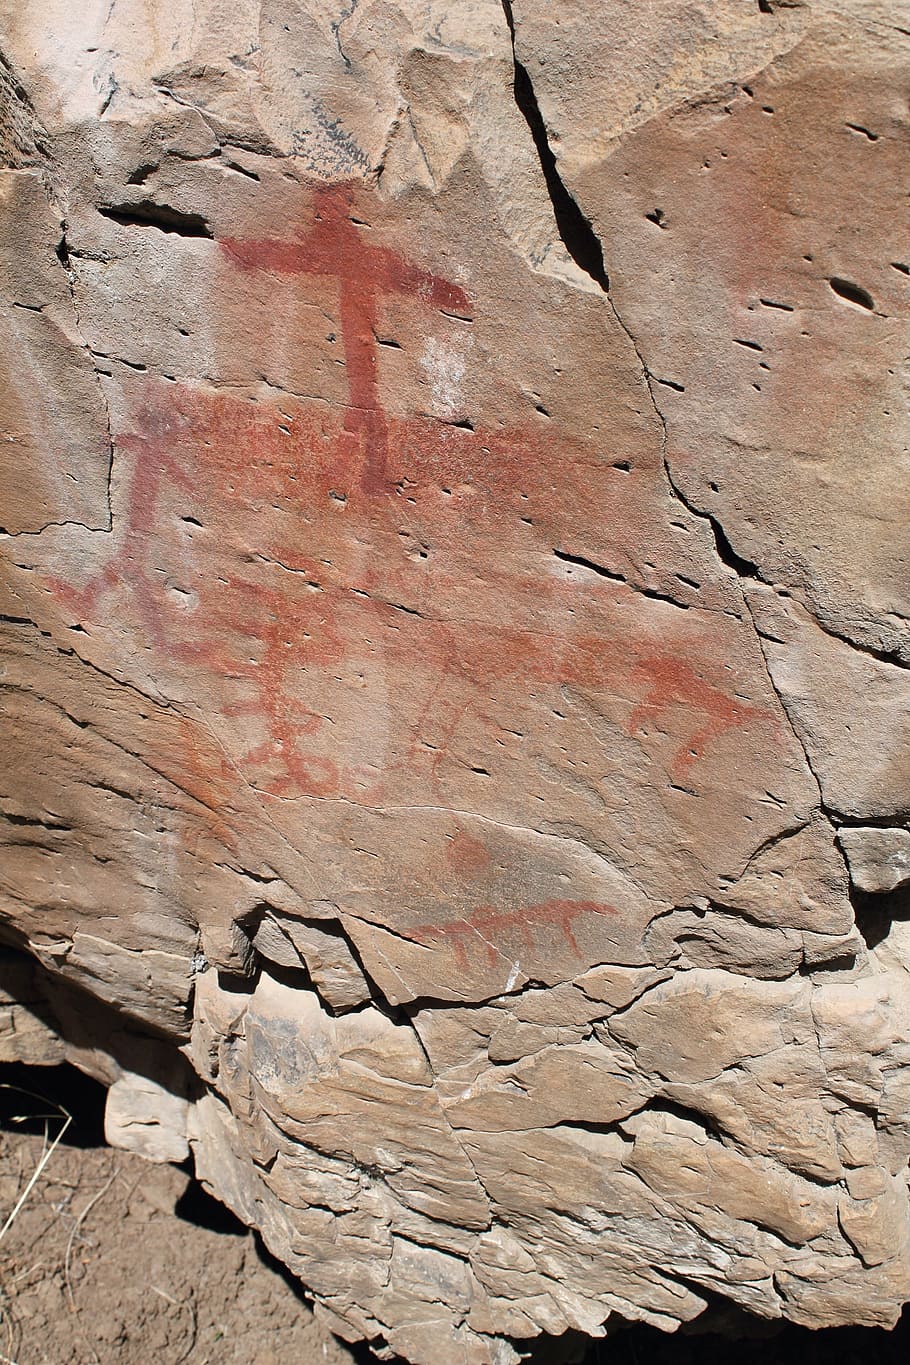 pictograph, south fork, rock art, drawing, native american, wall painting, american, native, primitive, close-up